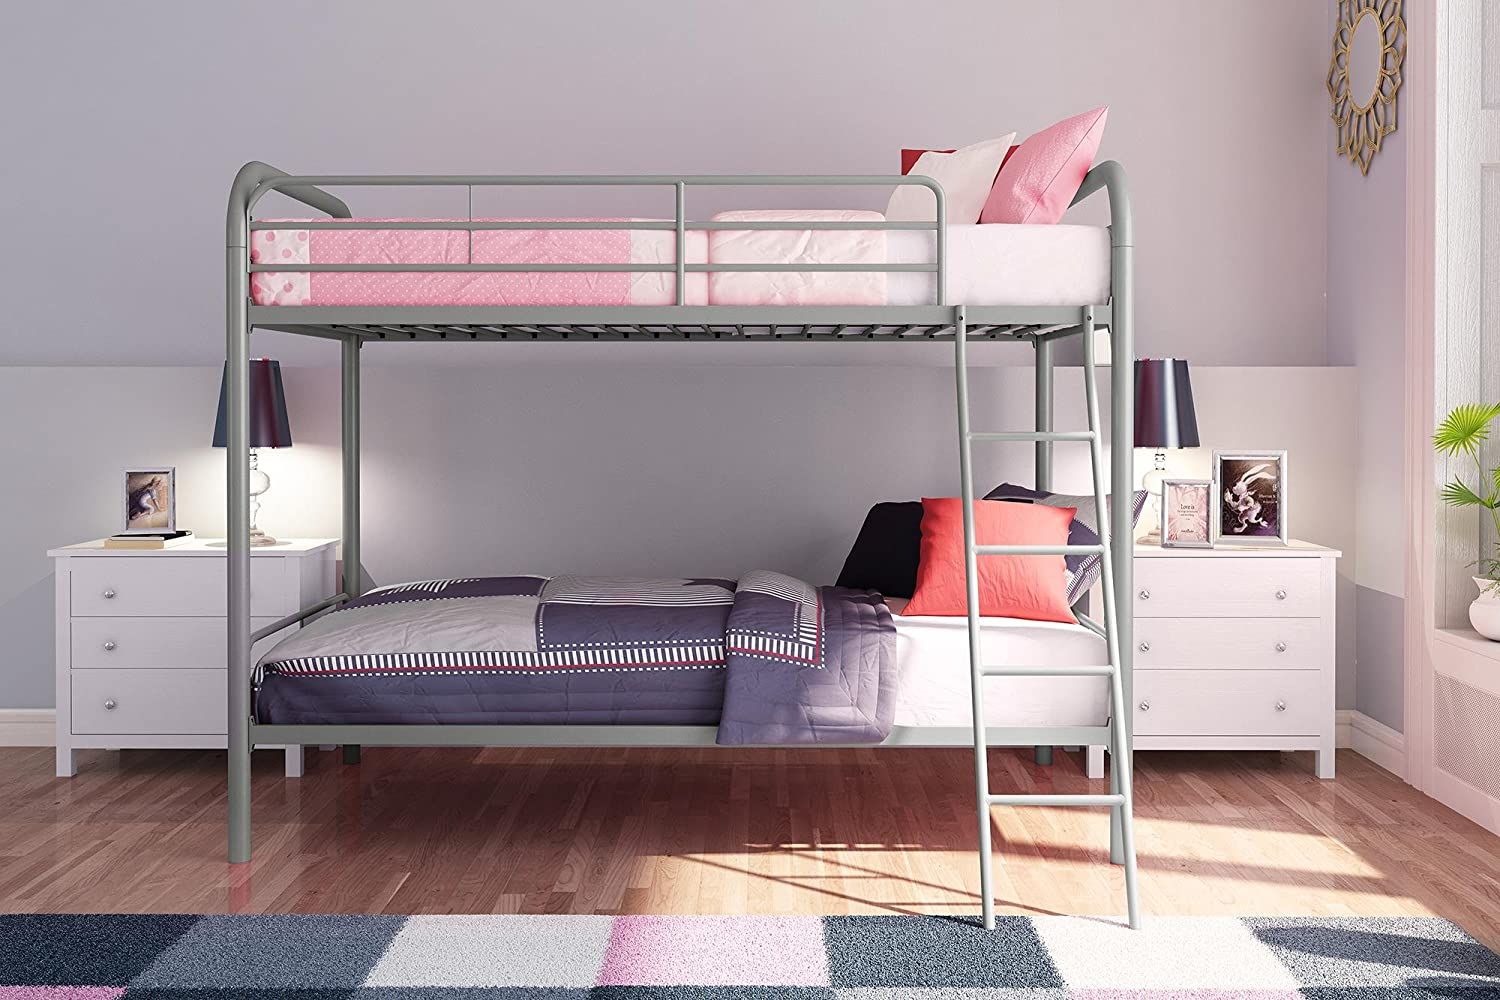 8 Best Bunk Beds 2020 The Strategist, Rooms To Go Bunk Beds With Sliders